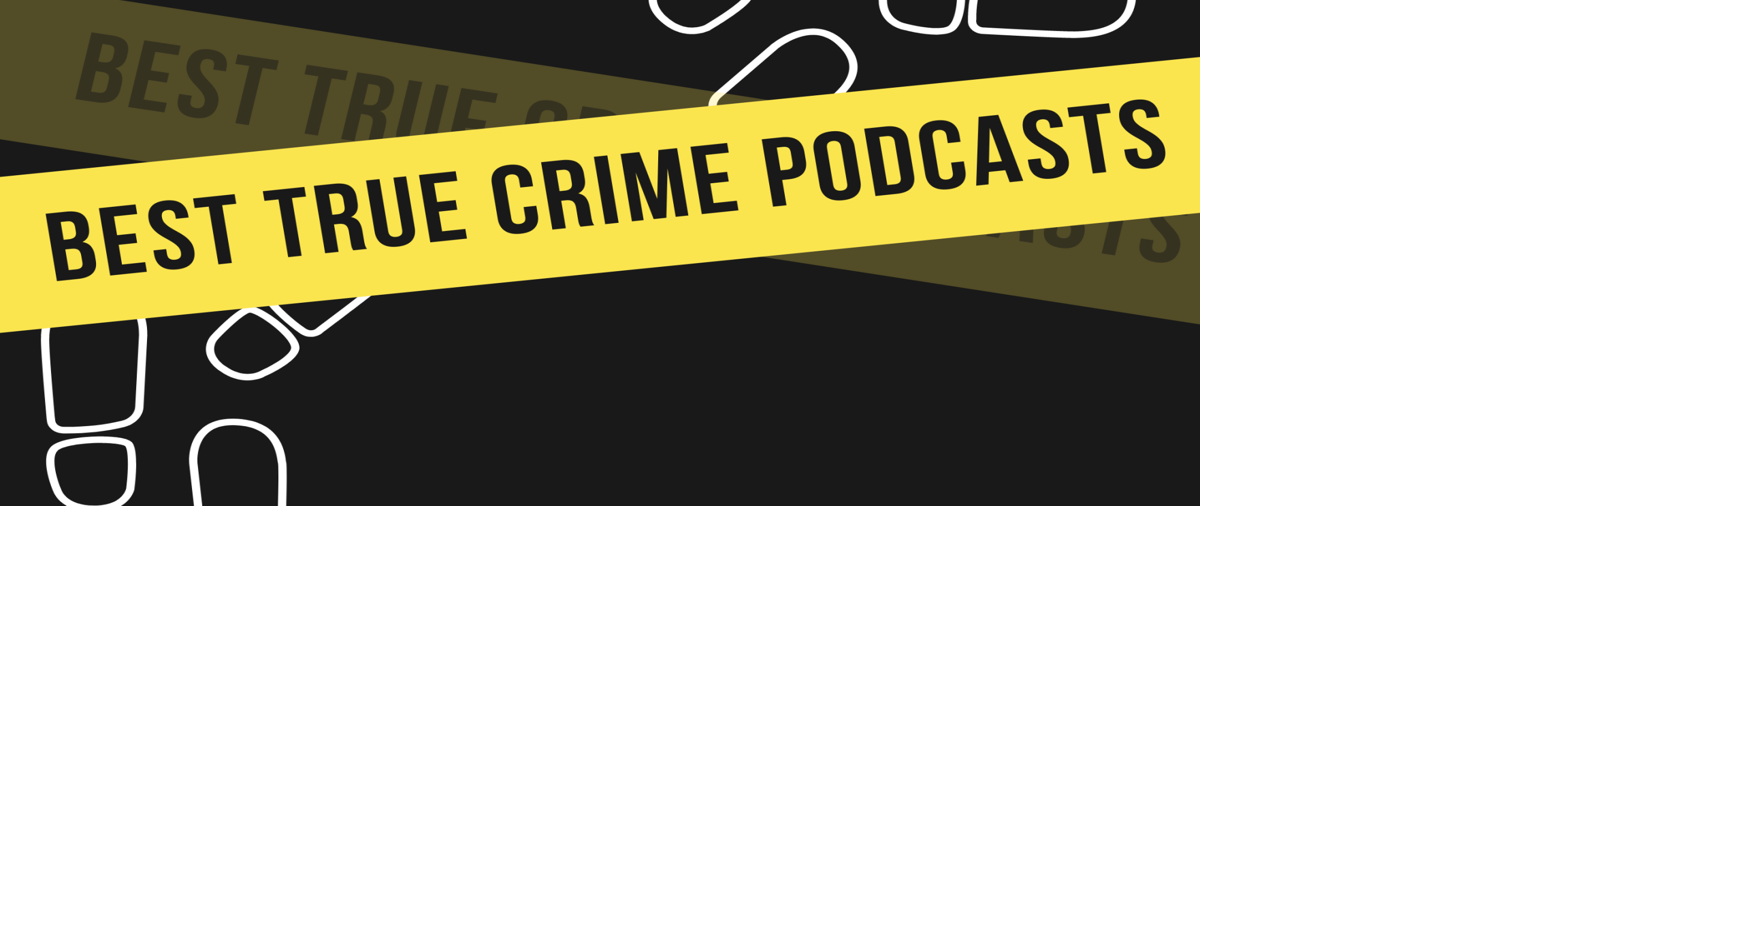 True Crime Content: What are the Effects? | Features | theutcecho.com